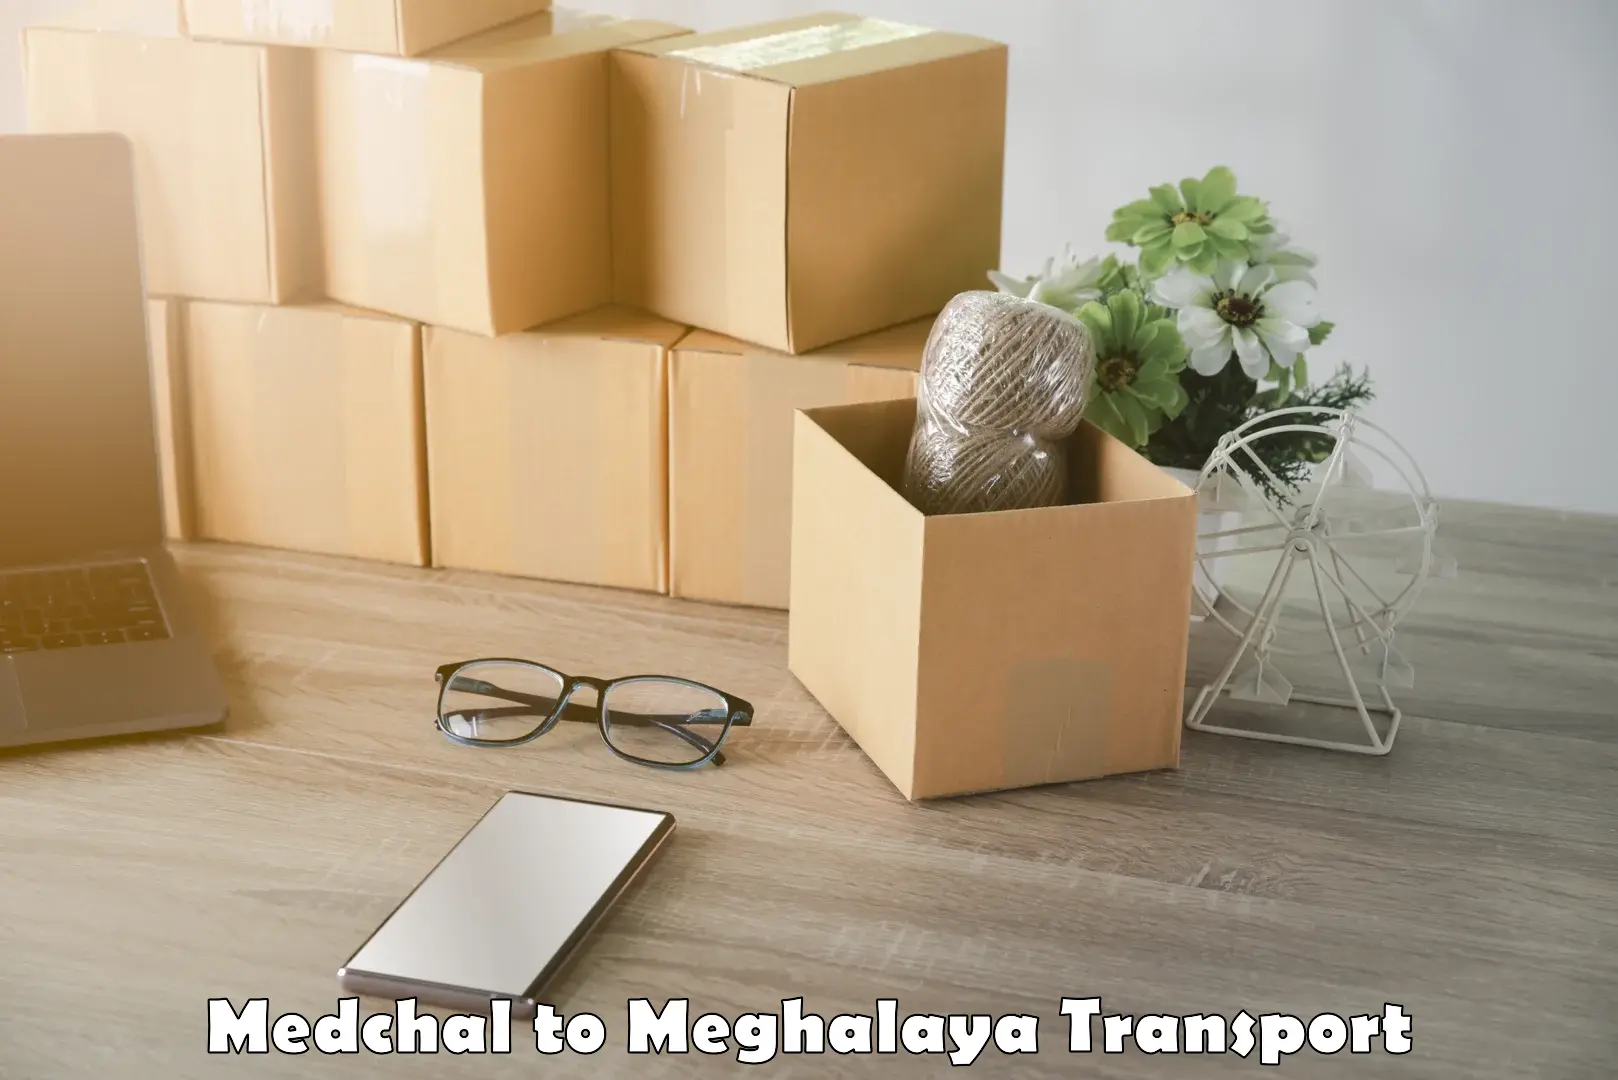 Parcel transport services in Medchal to Marshillong